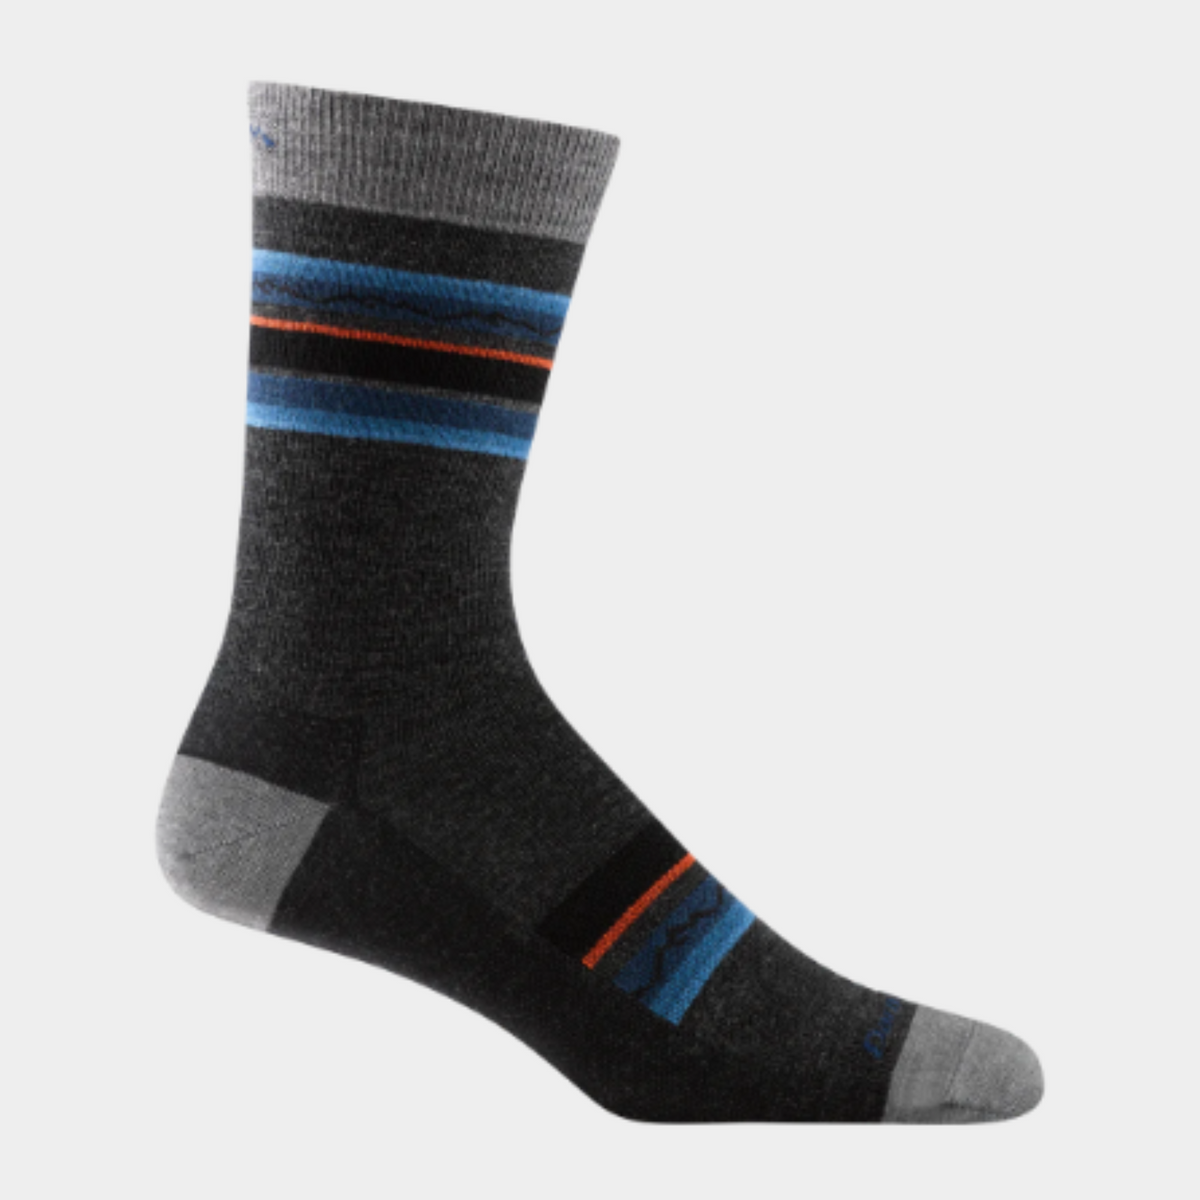 Darn Tough 6009 Whetstone Crew Lightweight men&#39;s crew sock featuring charcoal grey sock with blue, red, and black stripes at the top. Sock shown on display foot.